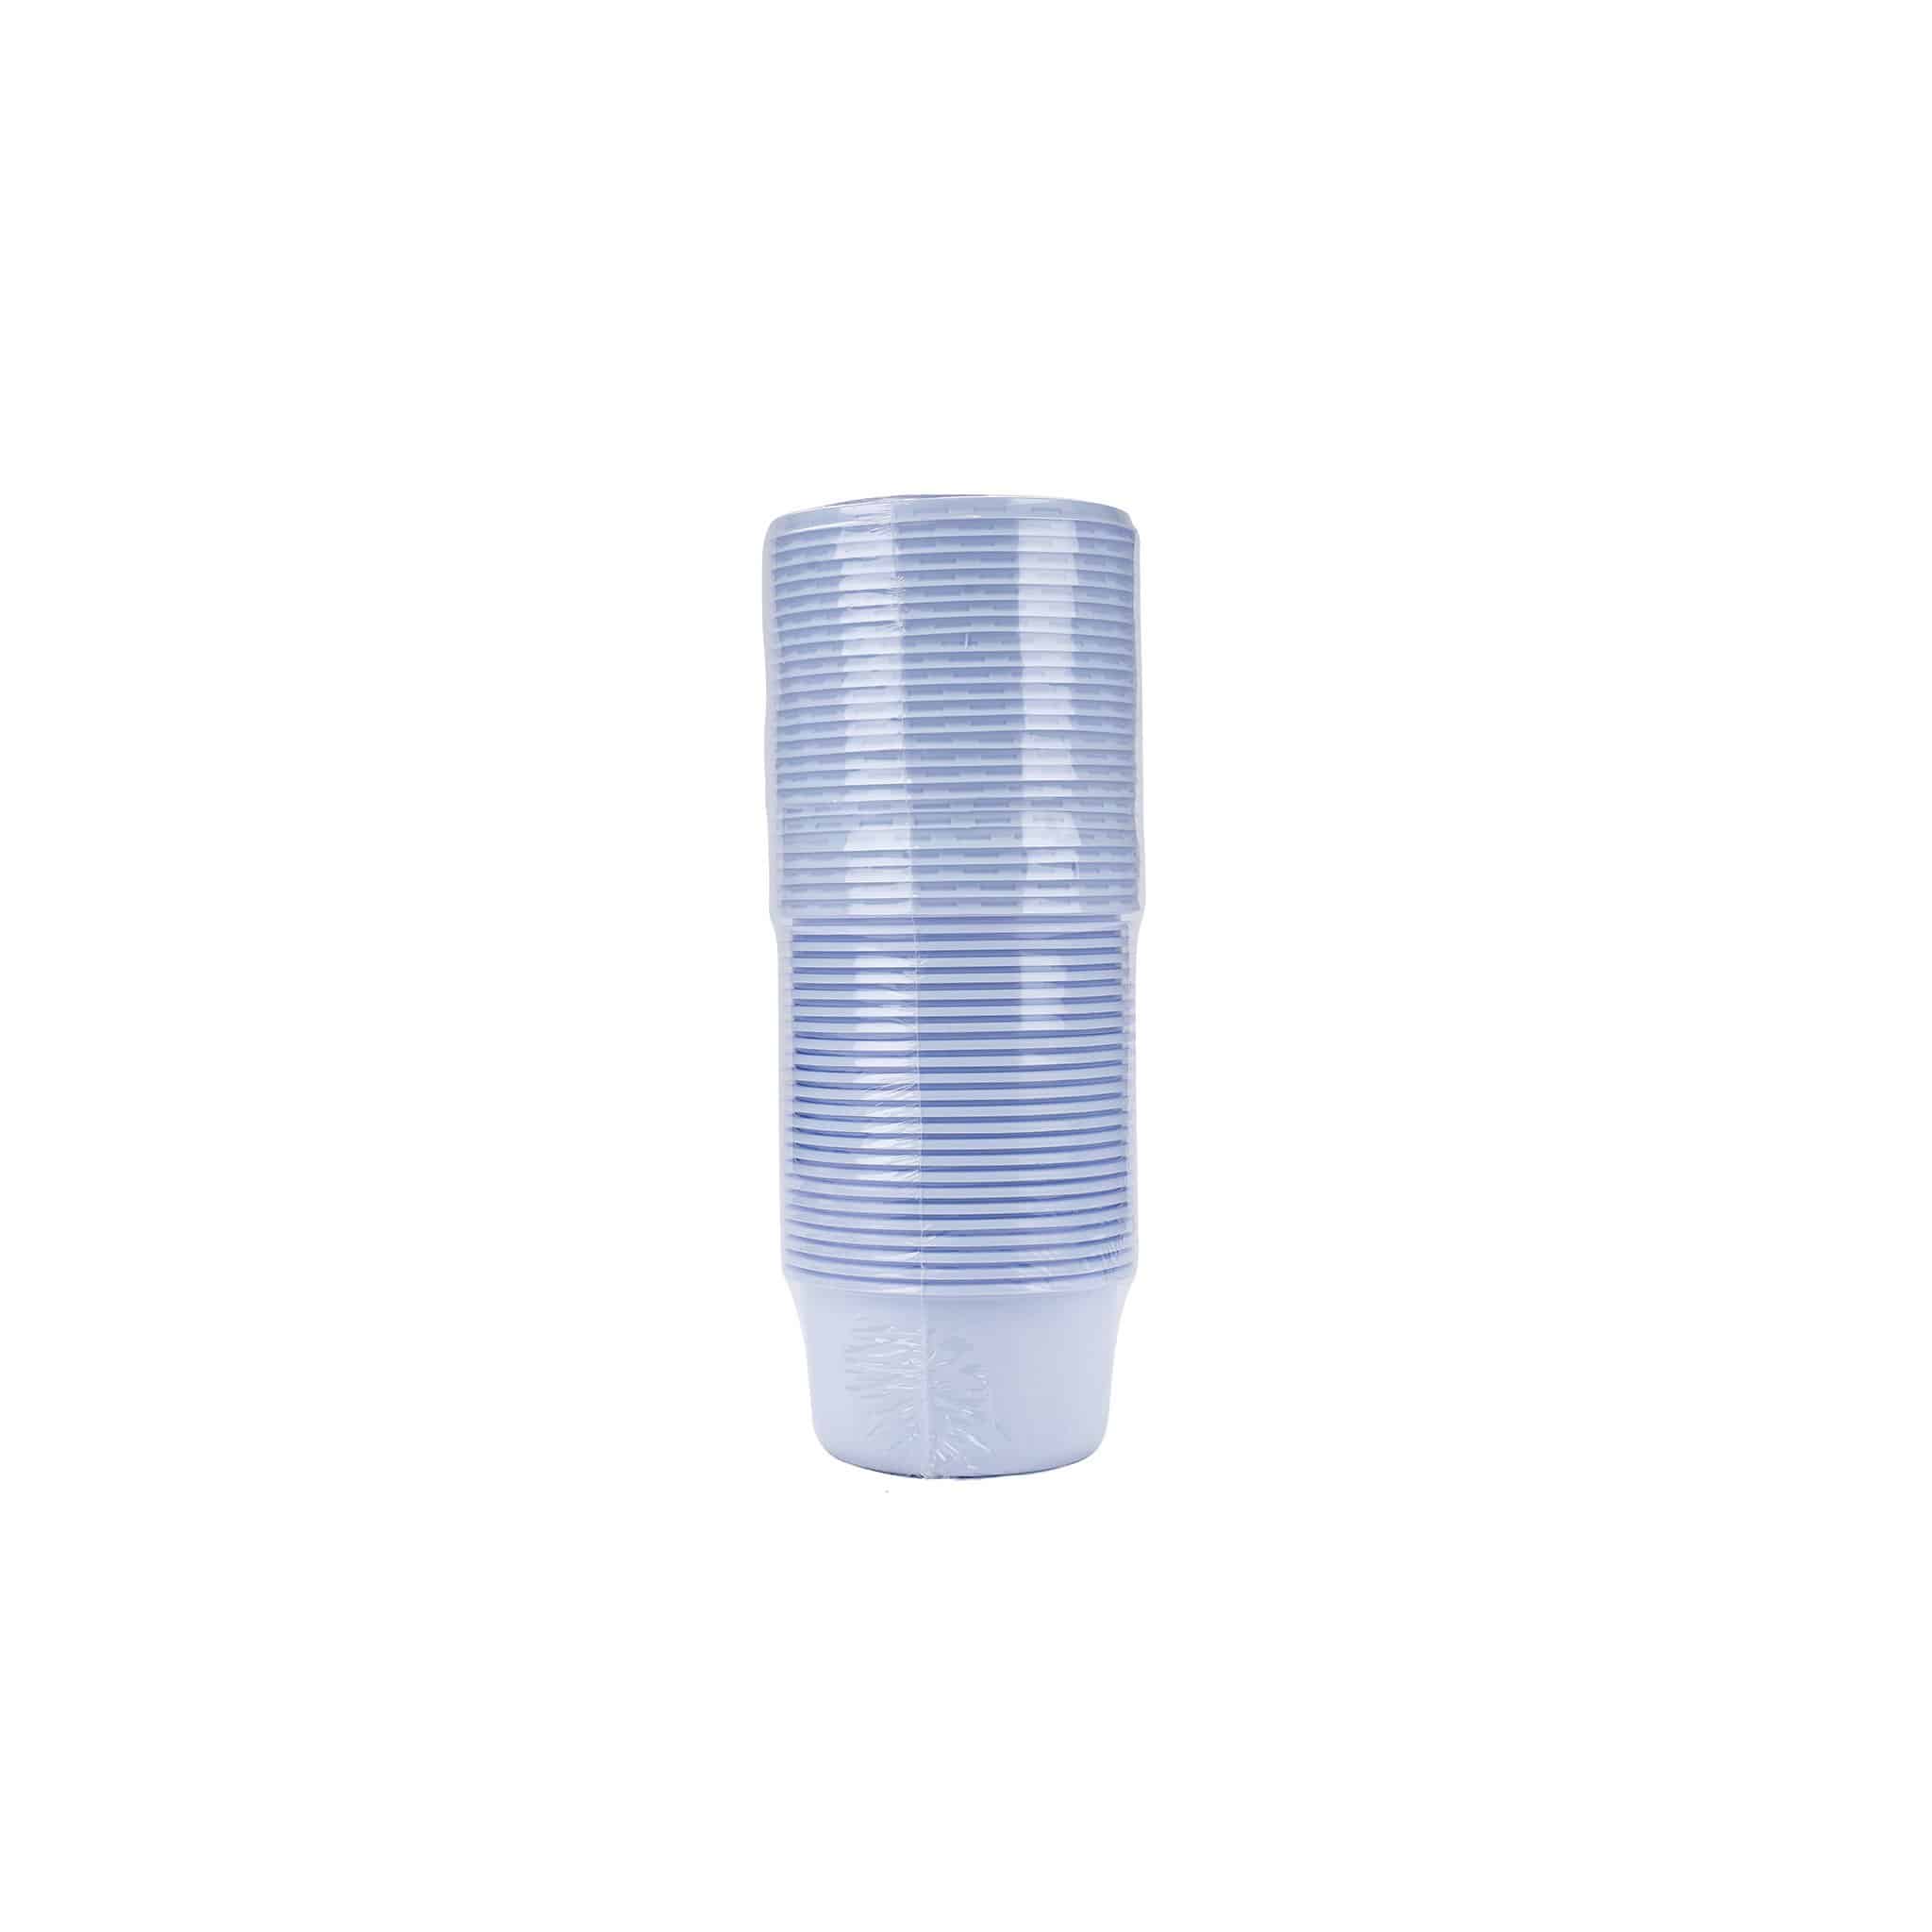 Plastic White Bowl 400Ml With Lid